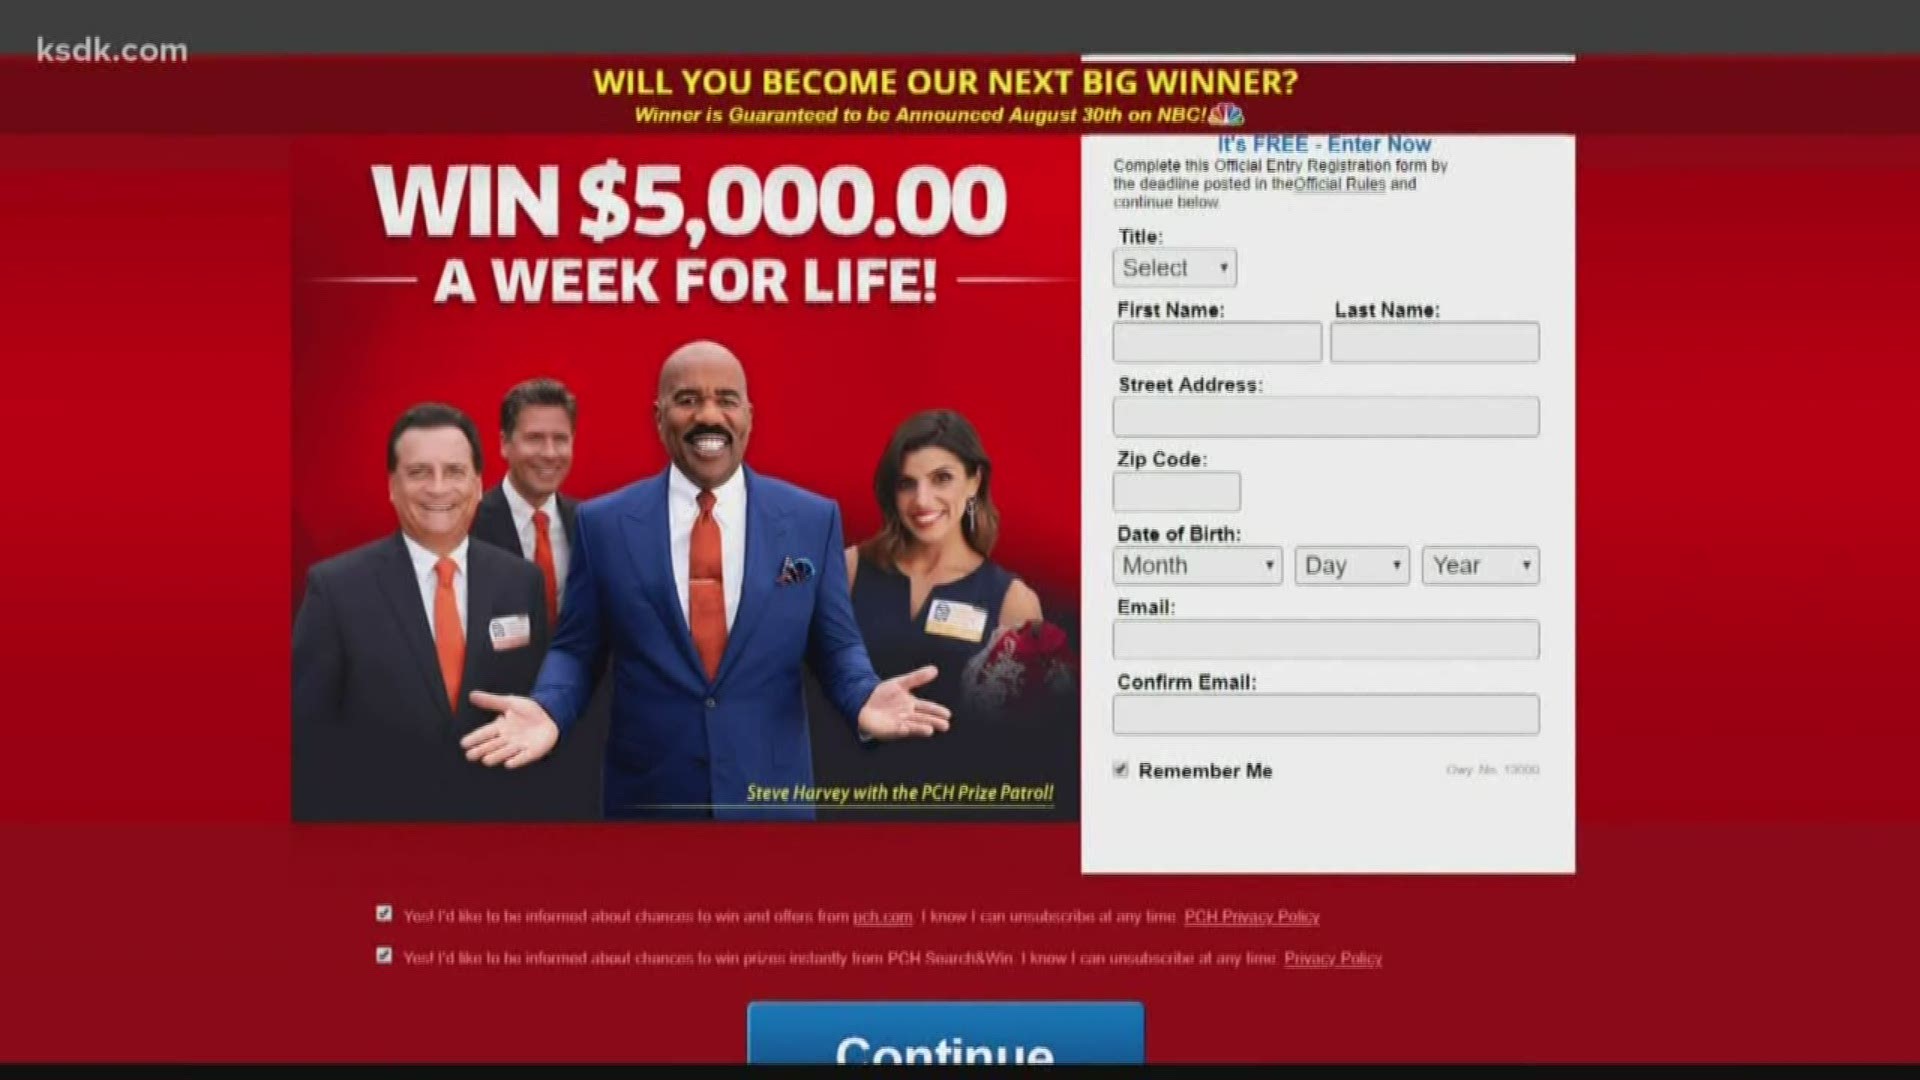 Their TV ads show people being presented with huge checks worth big money, but do people really win that much money?